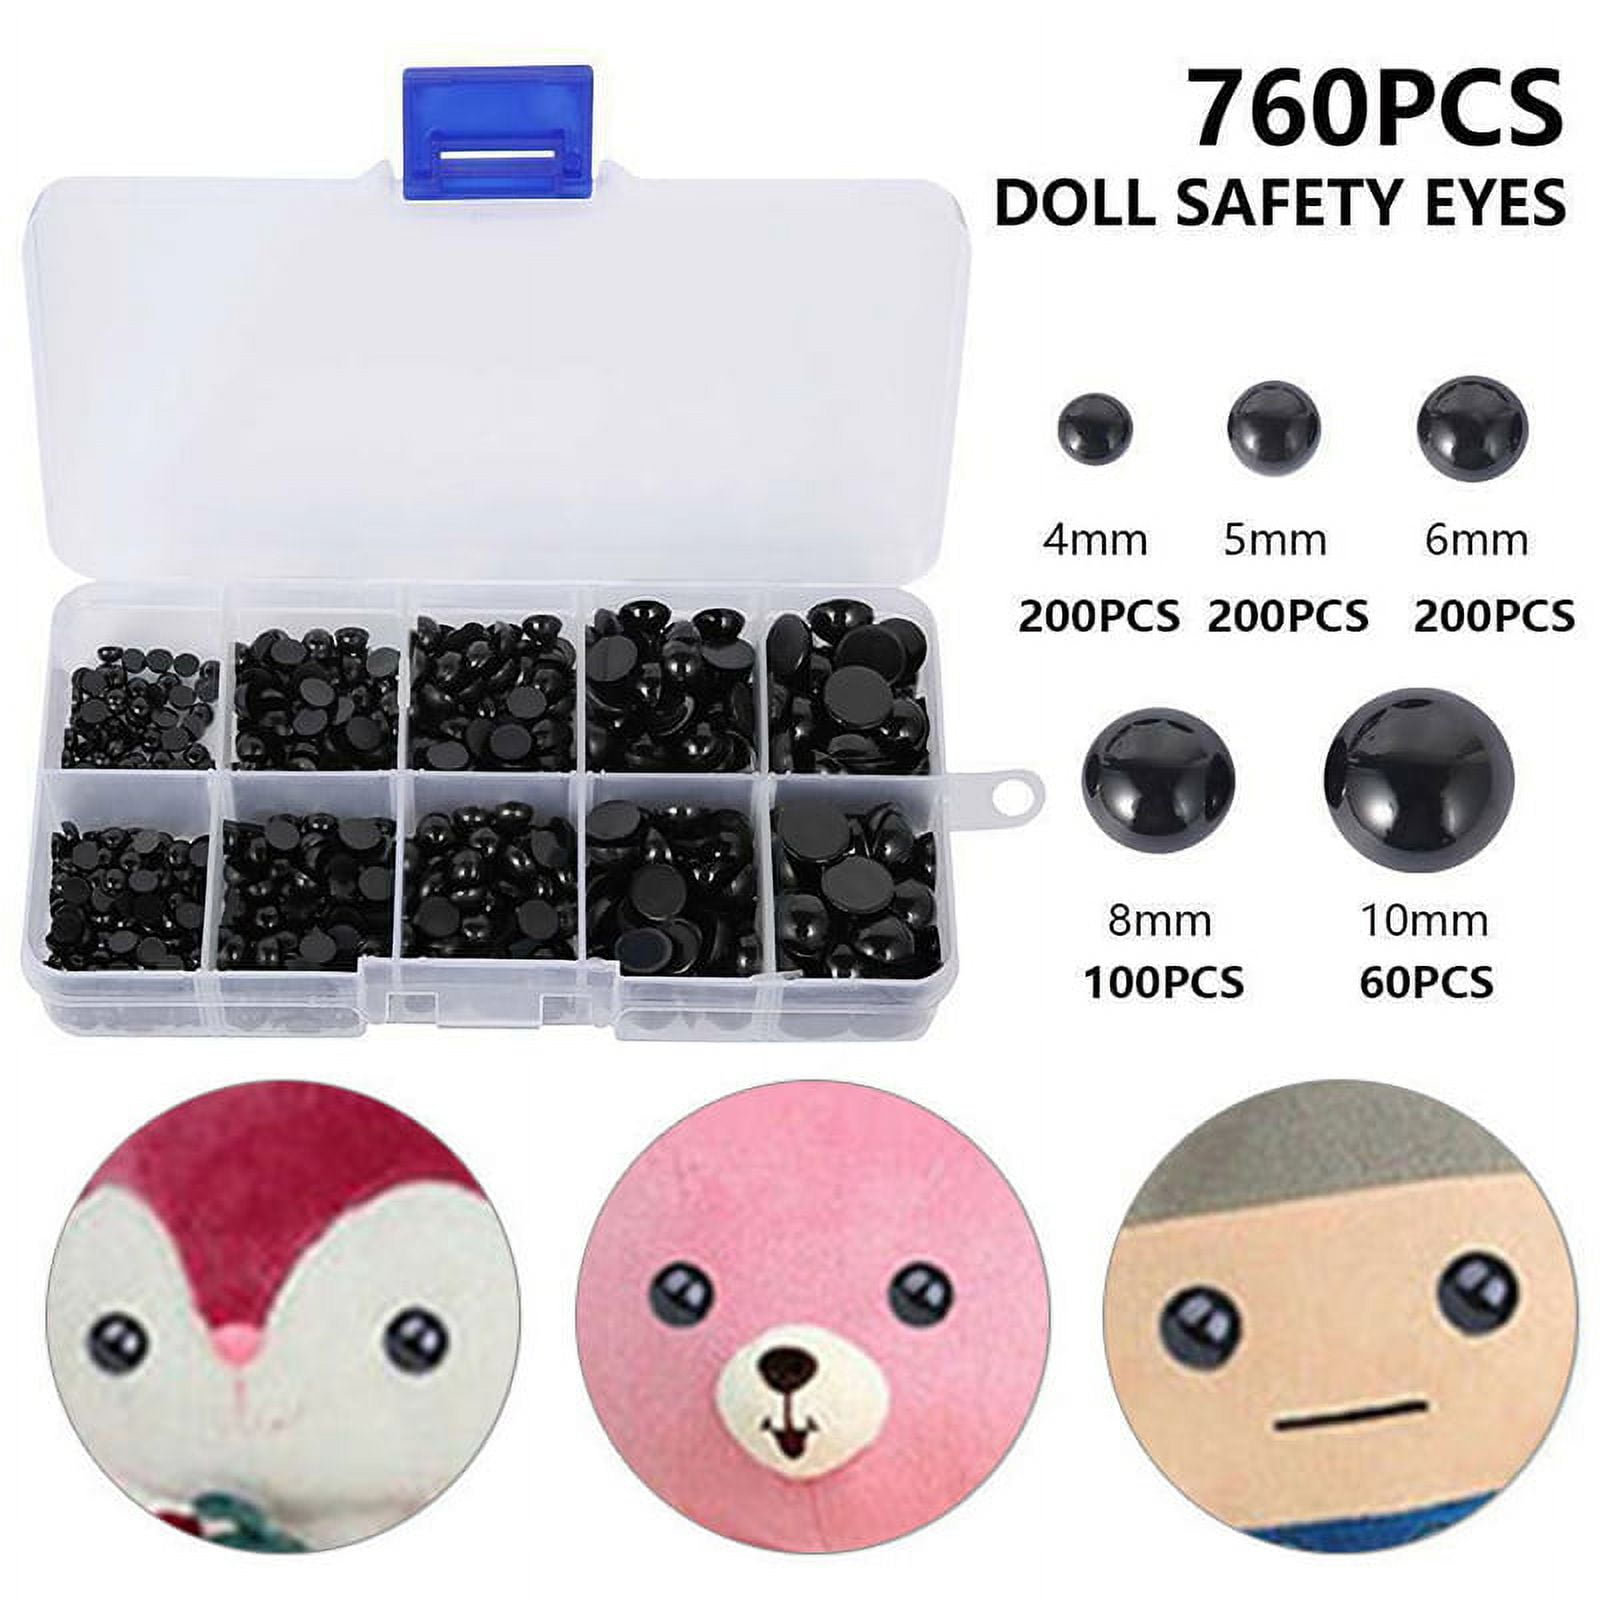 UPINS 500 Pieces 6-12MM Black Plastic Safety Eyes with Washers for Crochet  Animal Crafts Doll Making Supplier Bulk (4 Sizes) A:6-12MM